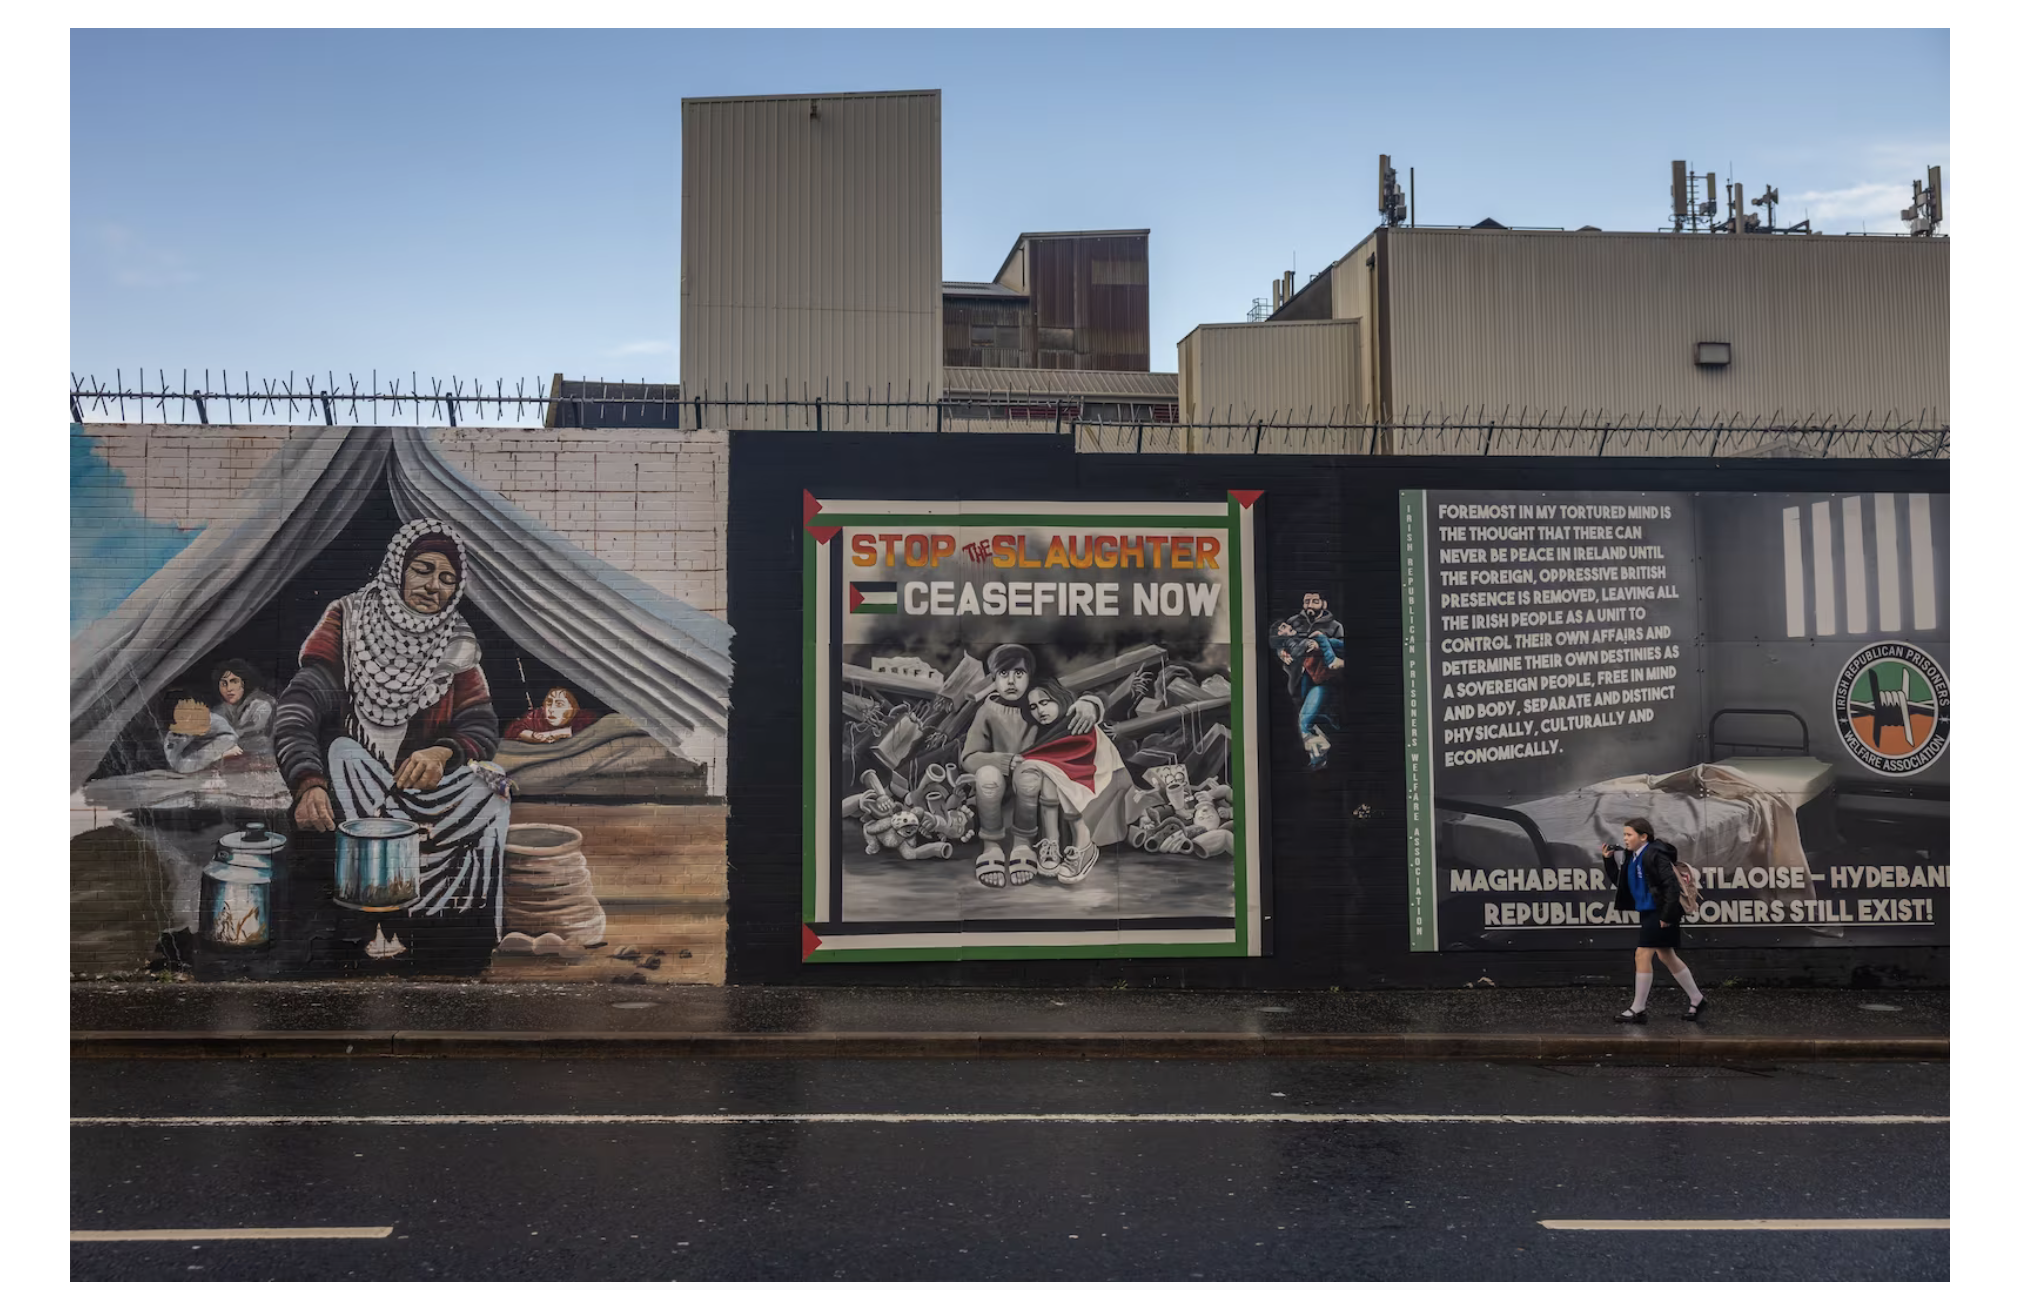 From the war in Gaza to the walls of Belfast- for The Globe&Mail